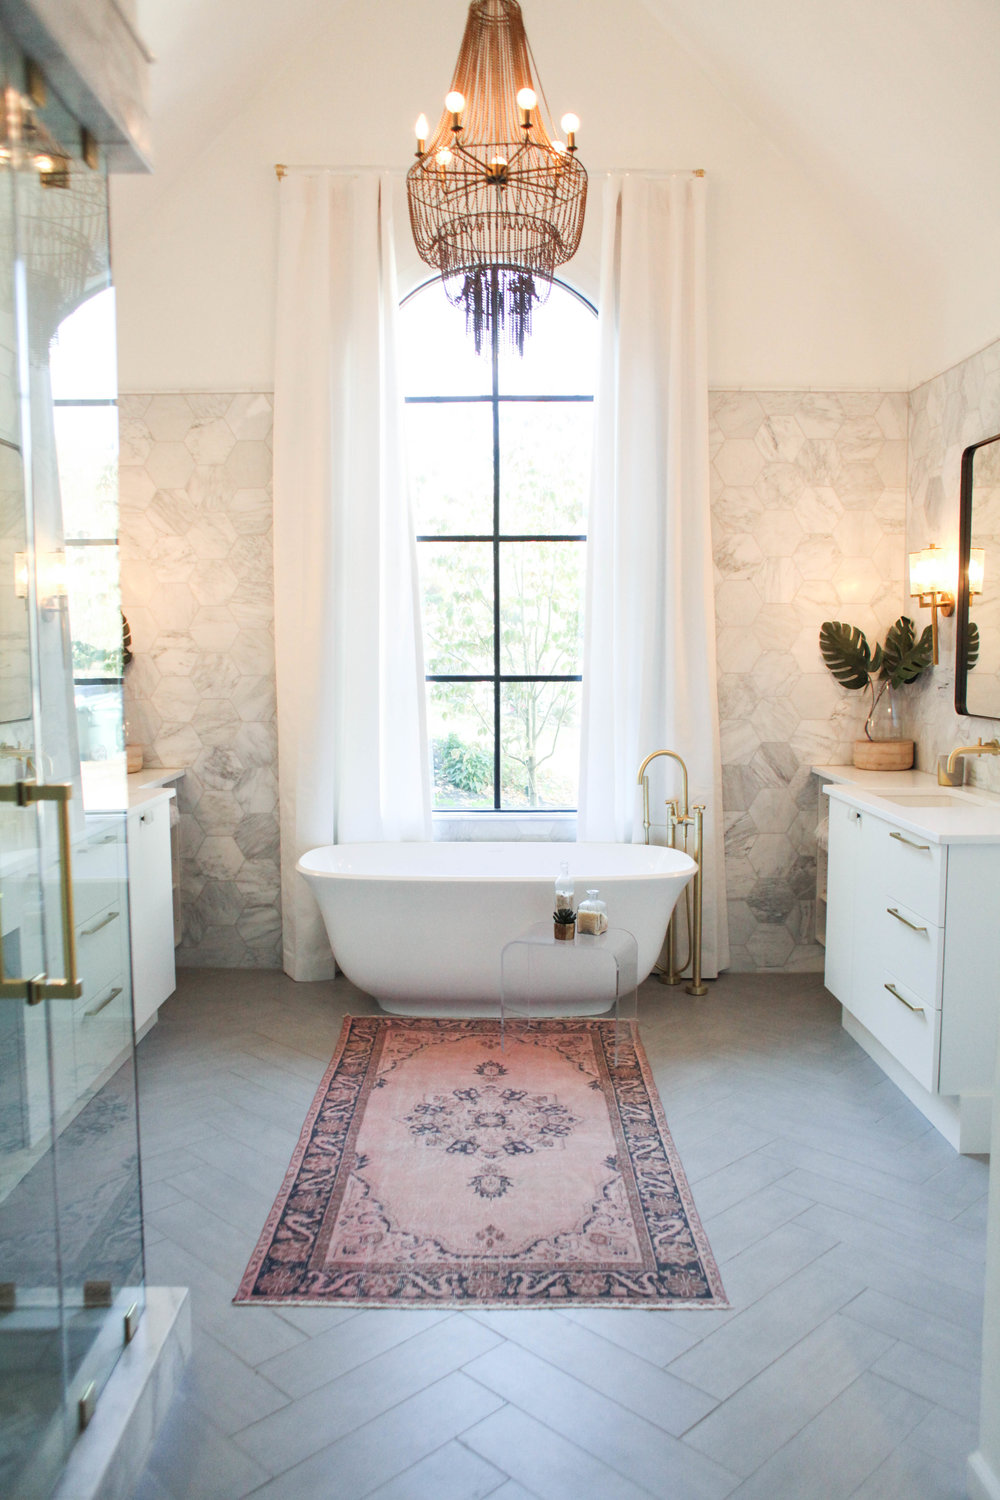 Bath with chandelier and pink rug via Redo Home and Design